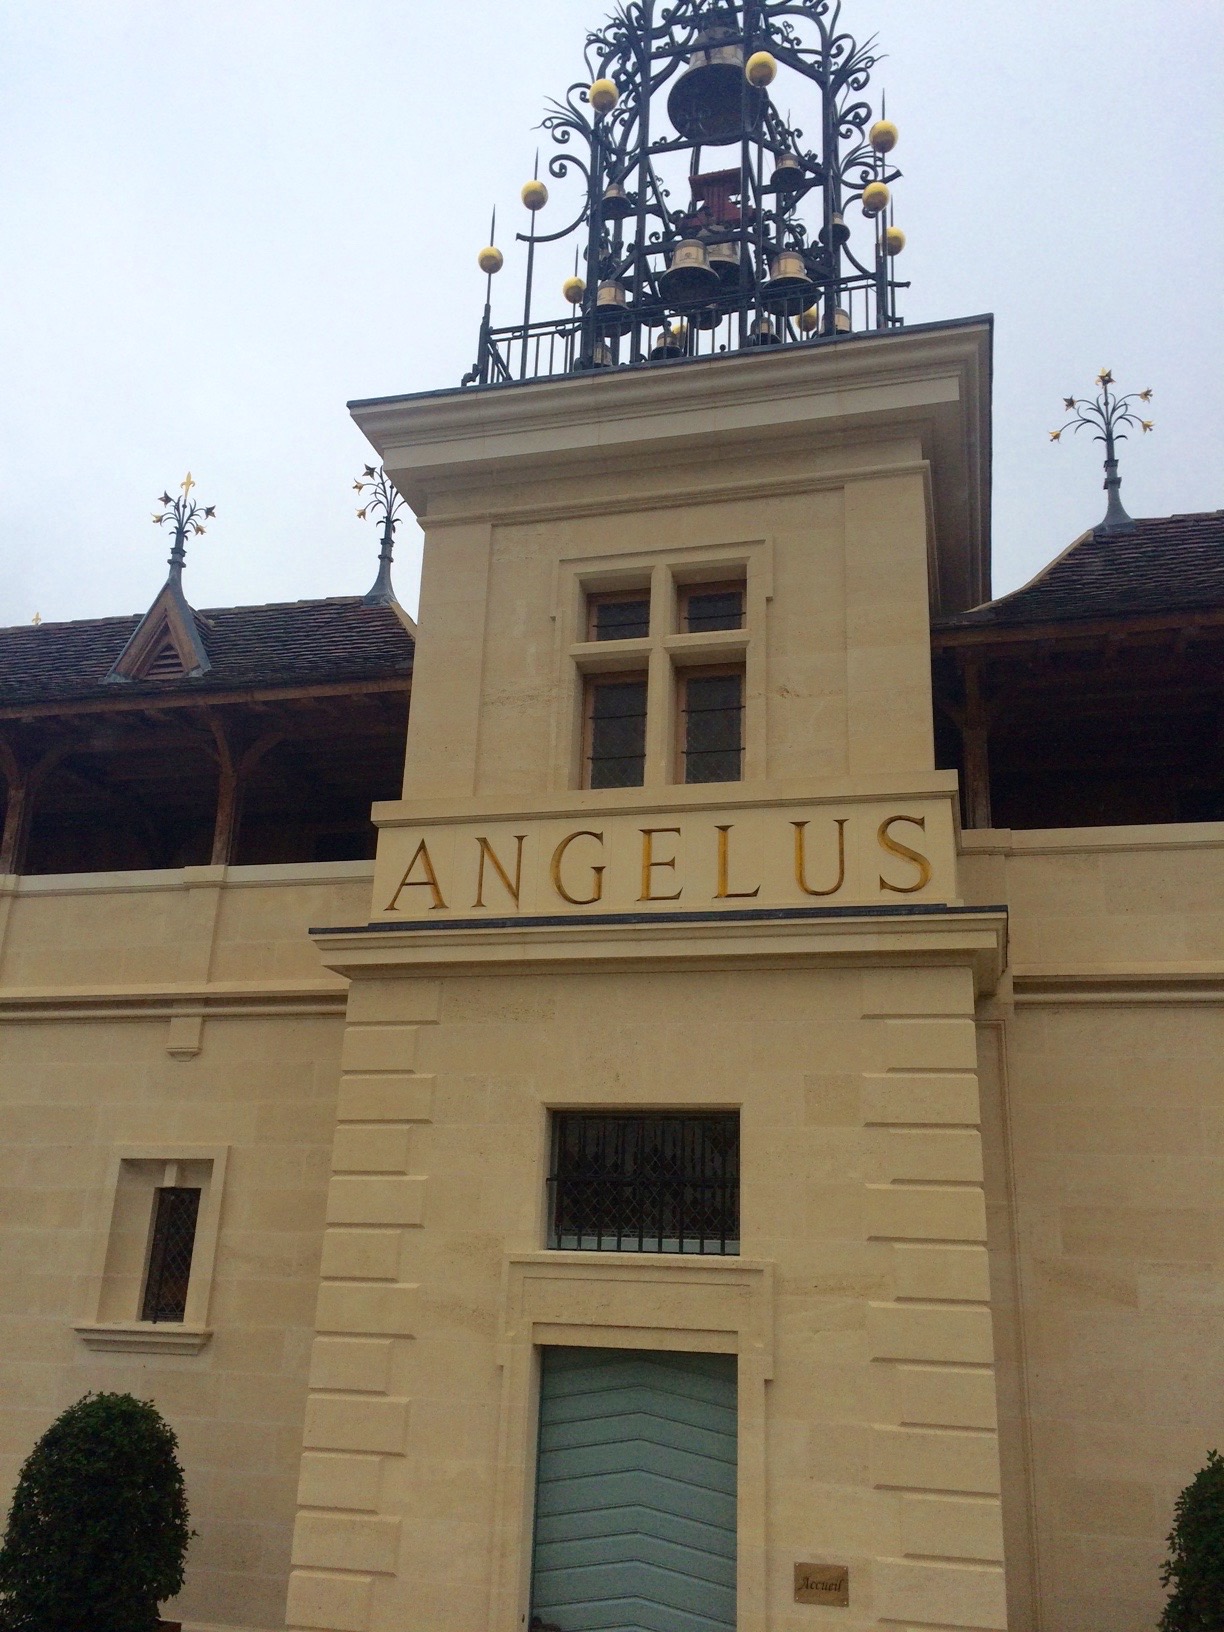 Château Angélus, a First Growth vineyard, is named for the Mazerat Chapel bells. Photo by Marla Norman.